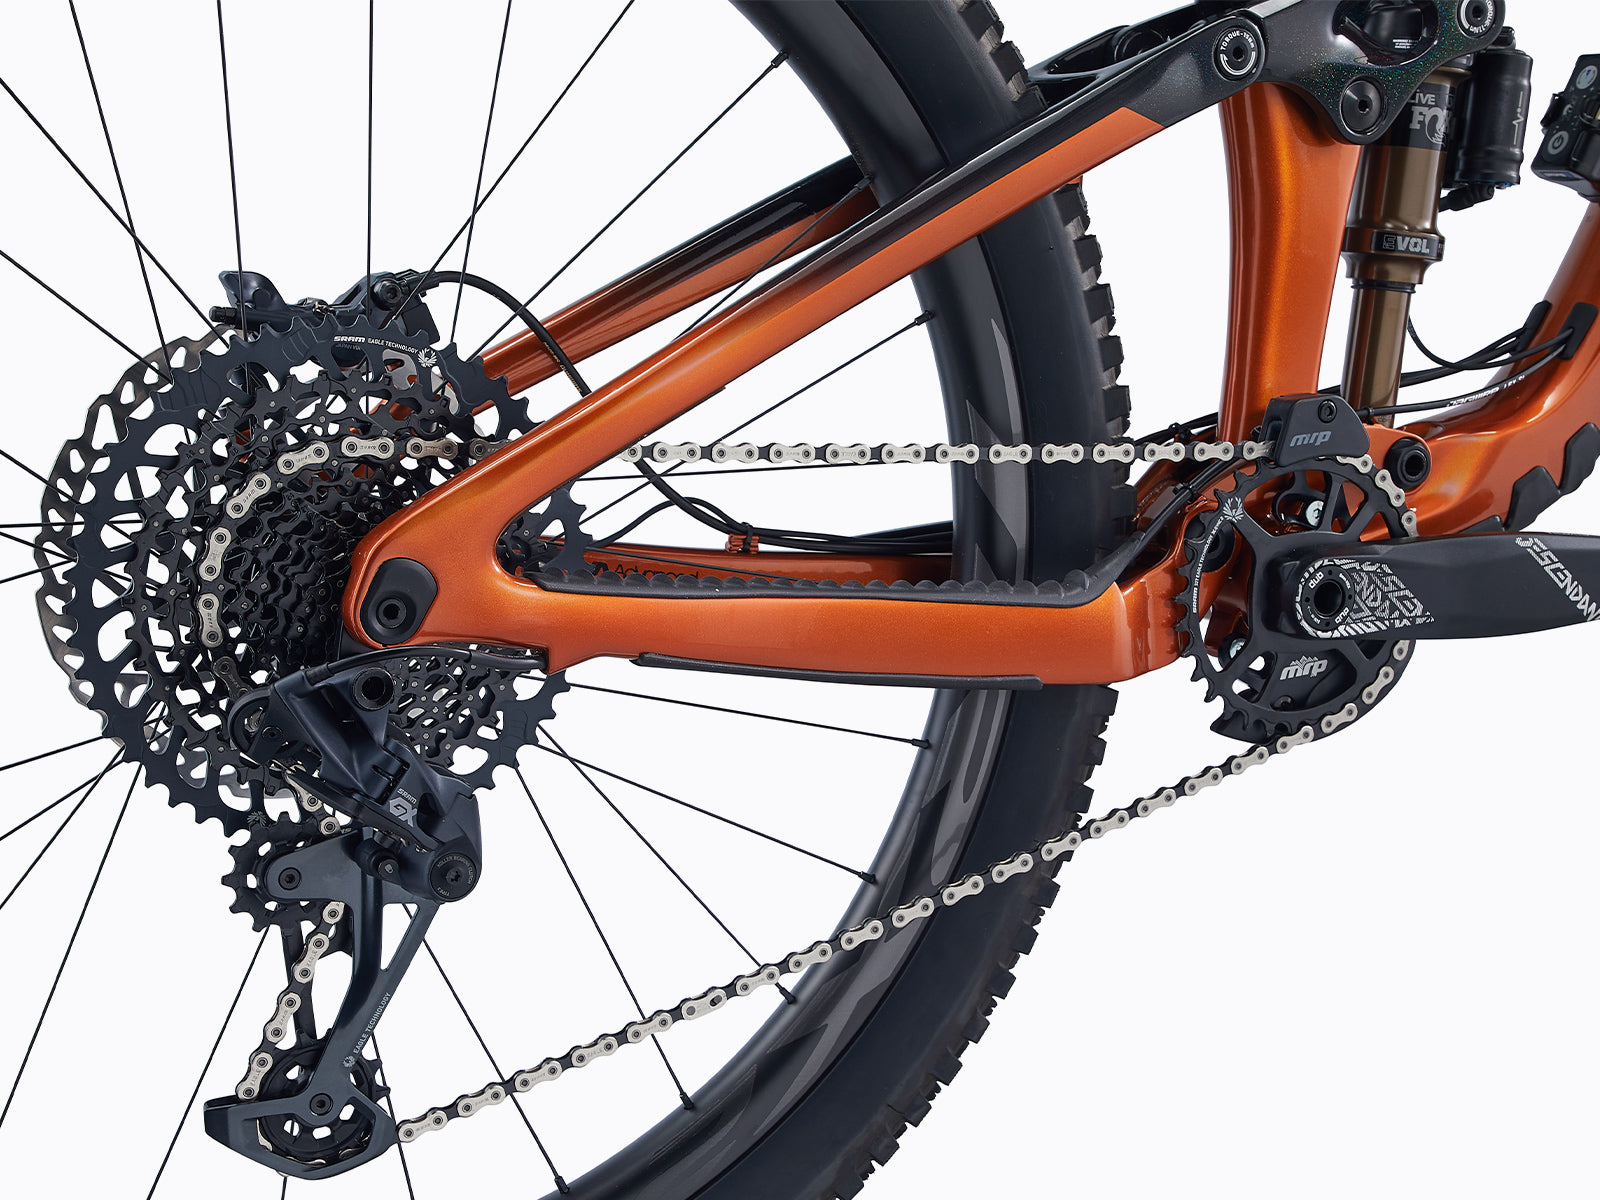 Image shows, giant reign advanced pro 29 1, a mens mountain bike from Giant now sold at Giant Melbourne